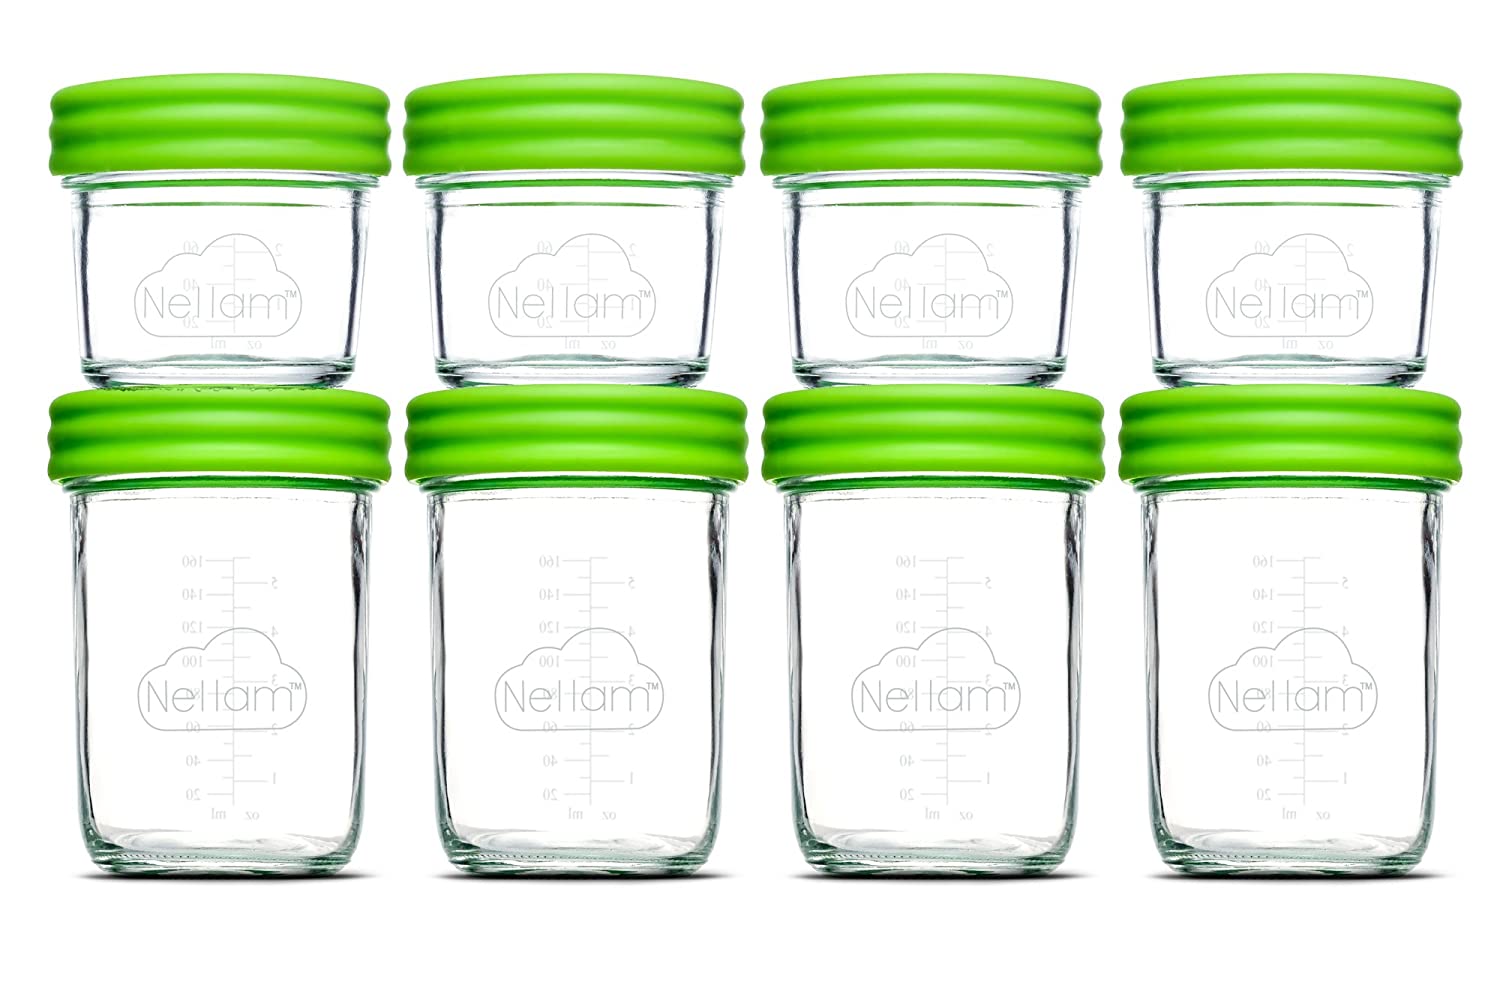 Nellam Baby Food Storage Containers - Leakproof, Airtight, Glass Jars for Freezing & Homemade Babyfood Prep 